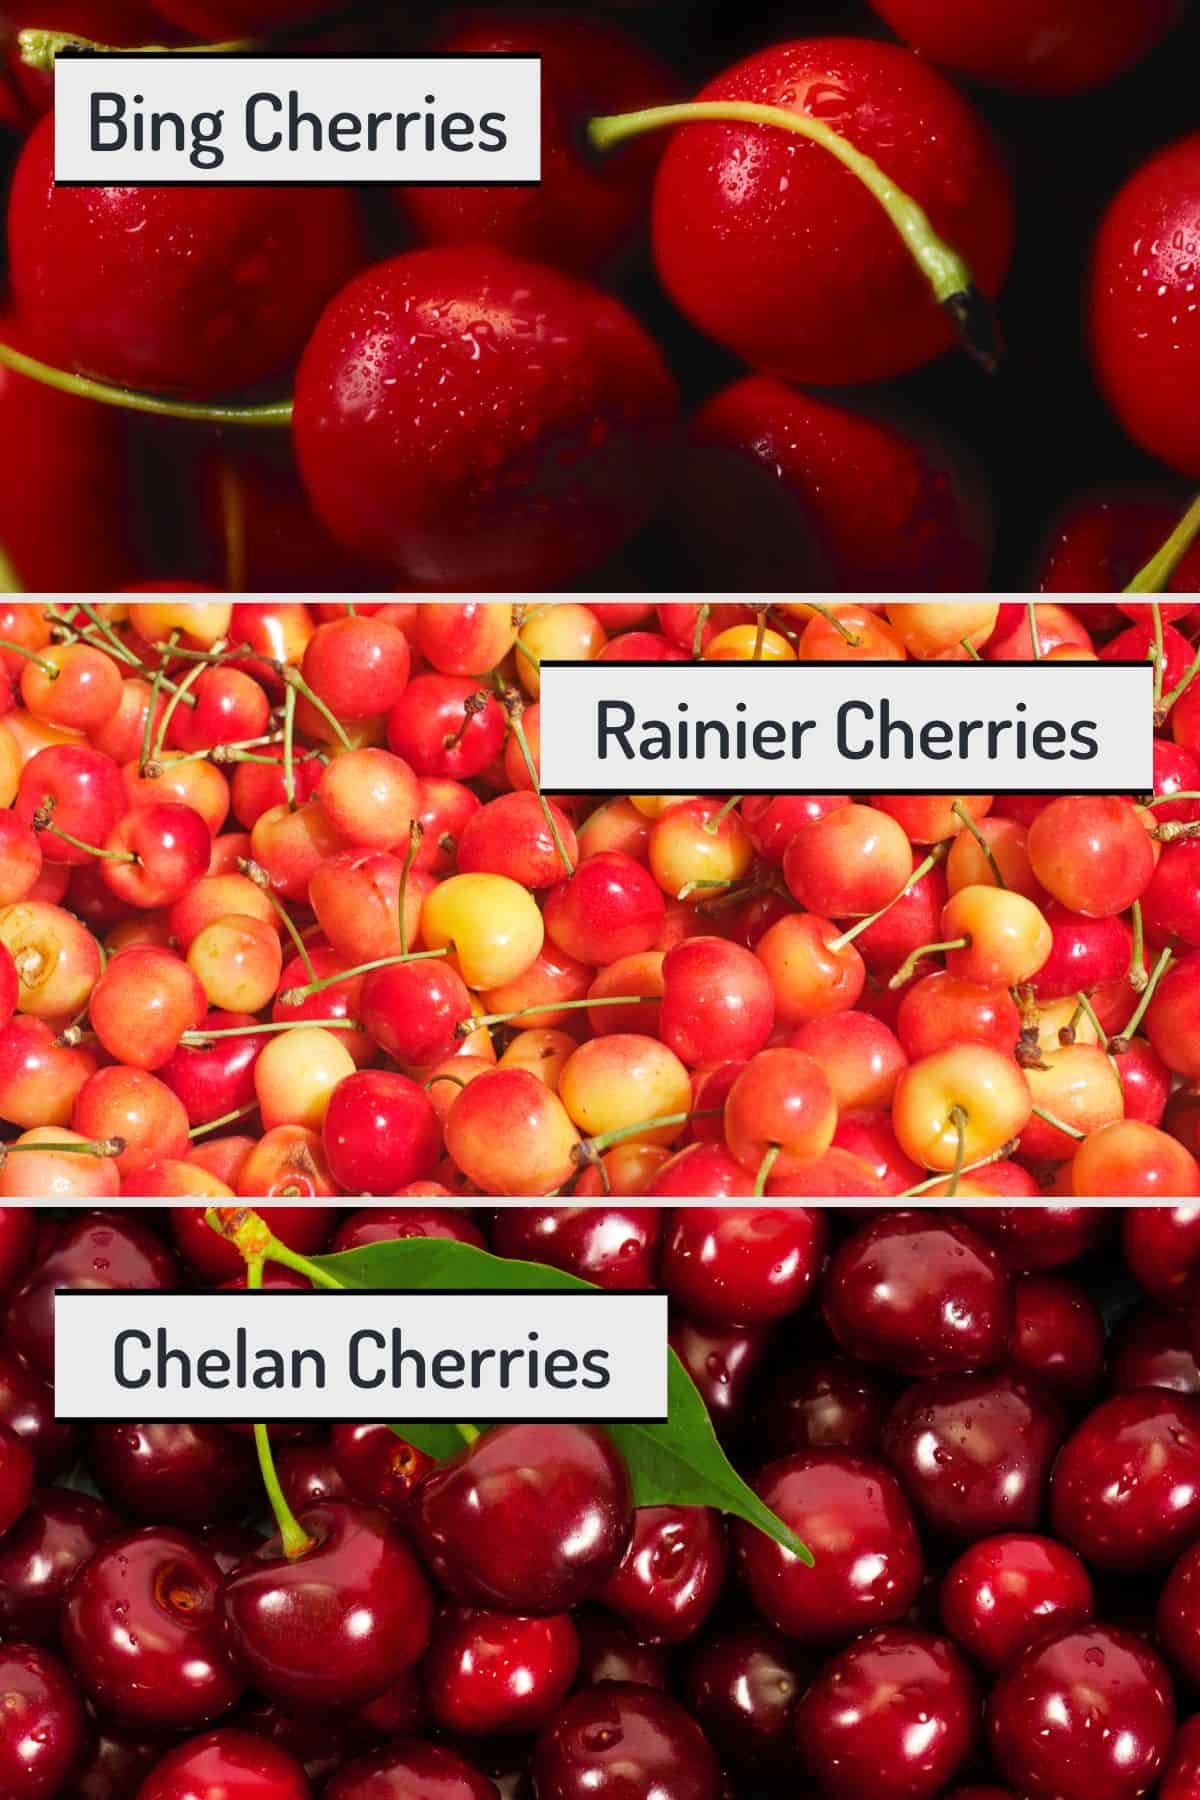 Three panel collage showing images of Bing cherries, Rainier cherries and Chelan cherries from top to bottom, with text overlay on each.